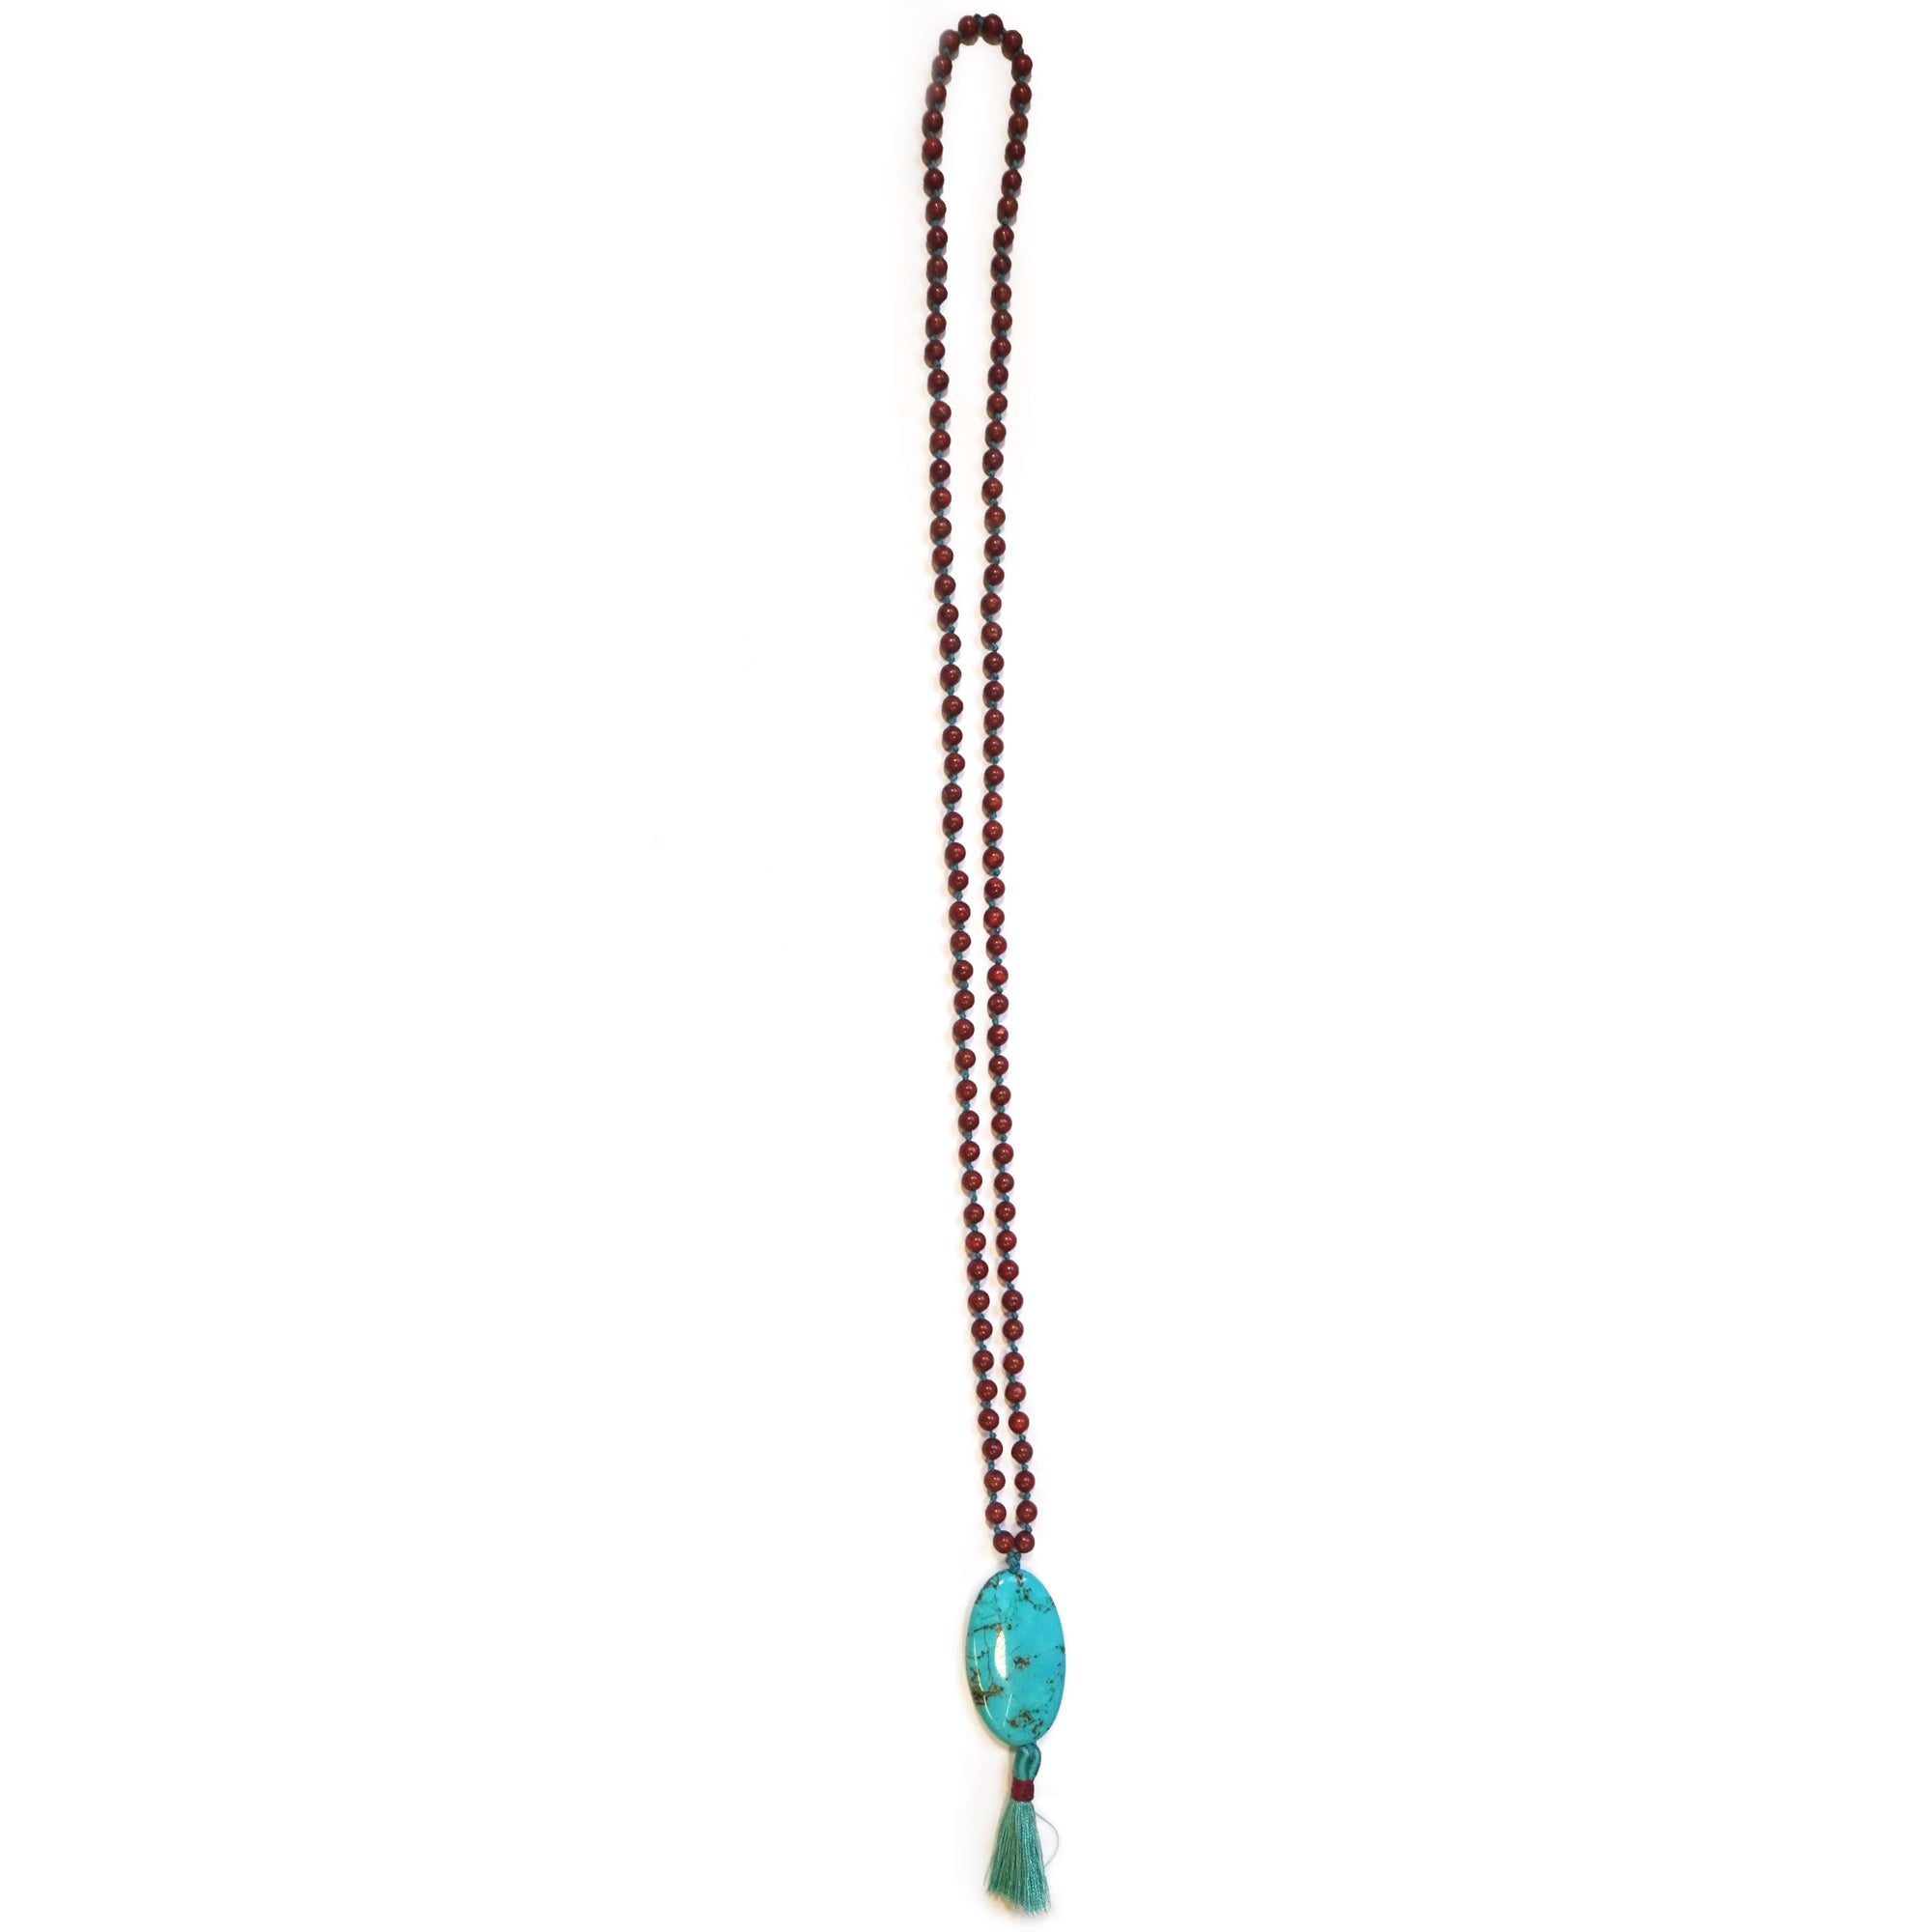 Patience and Perspective Mala Necklace